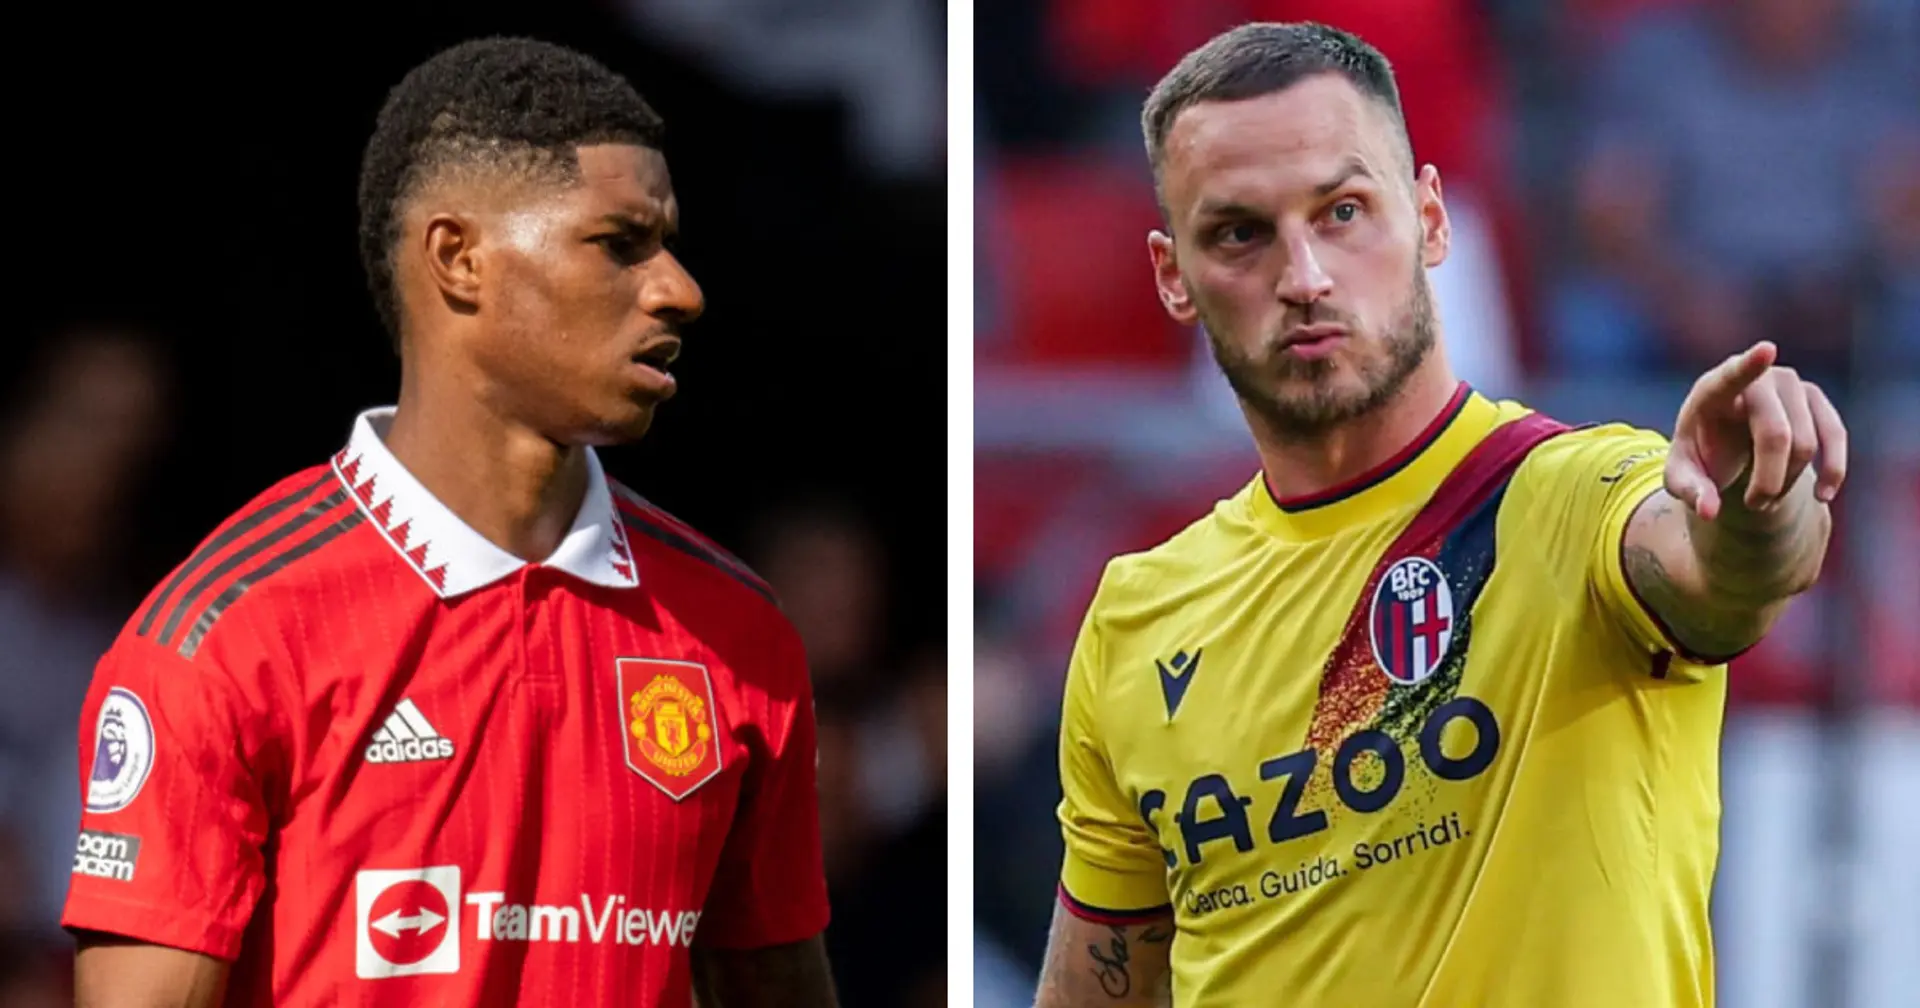 'I prefer Arnautovic': Man United fans react to Marcus Rashford's yet another poor game